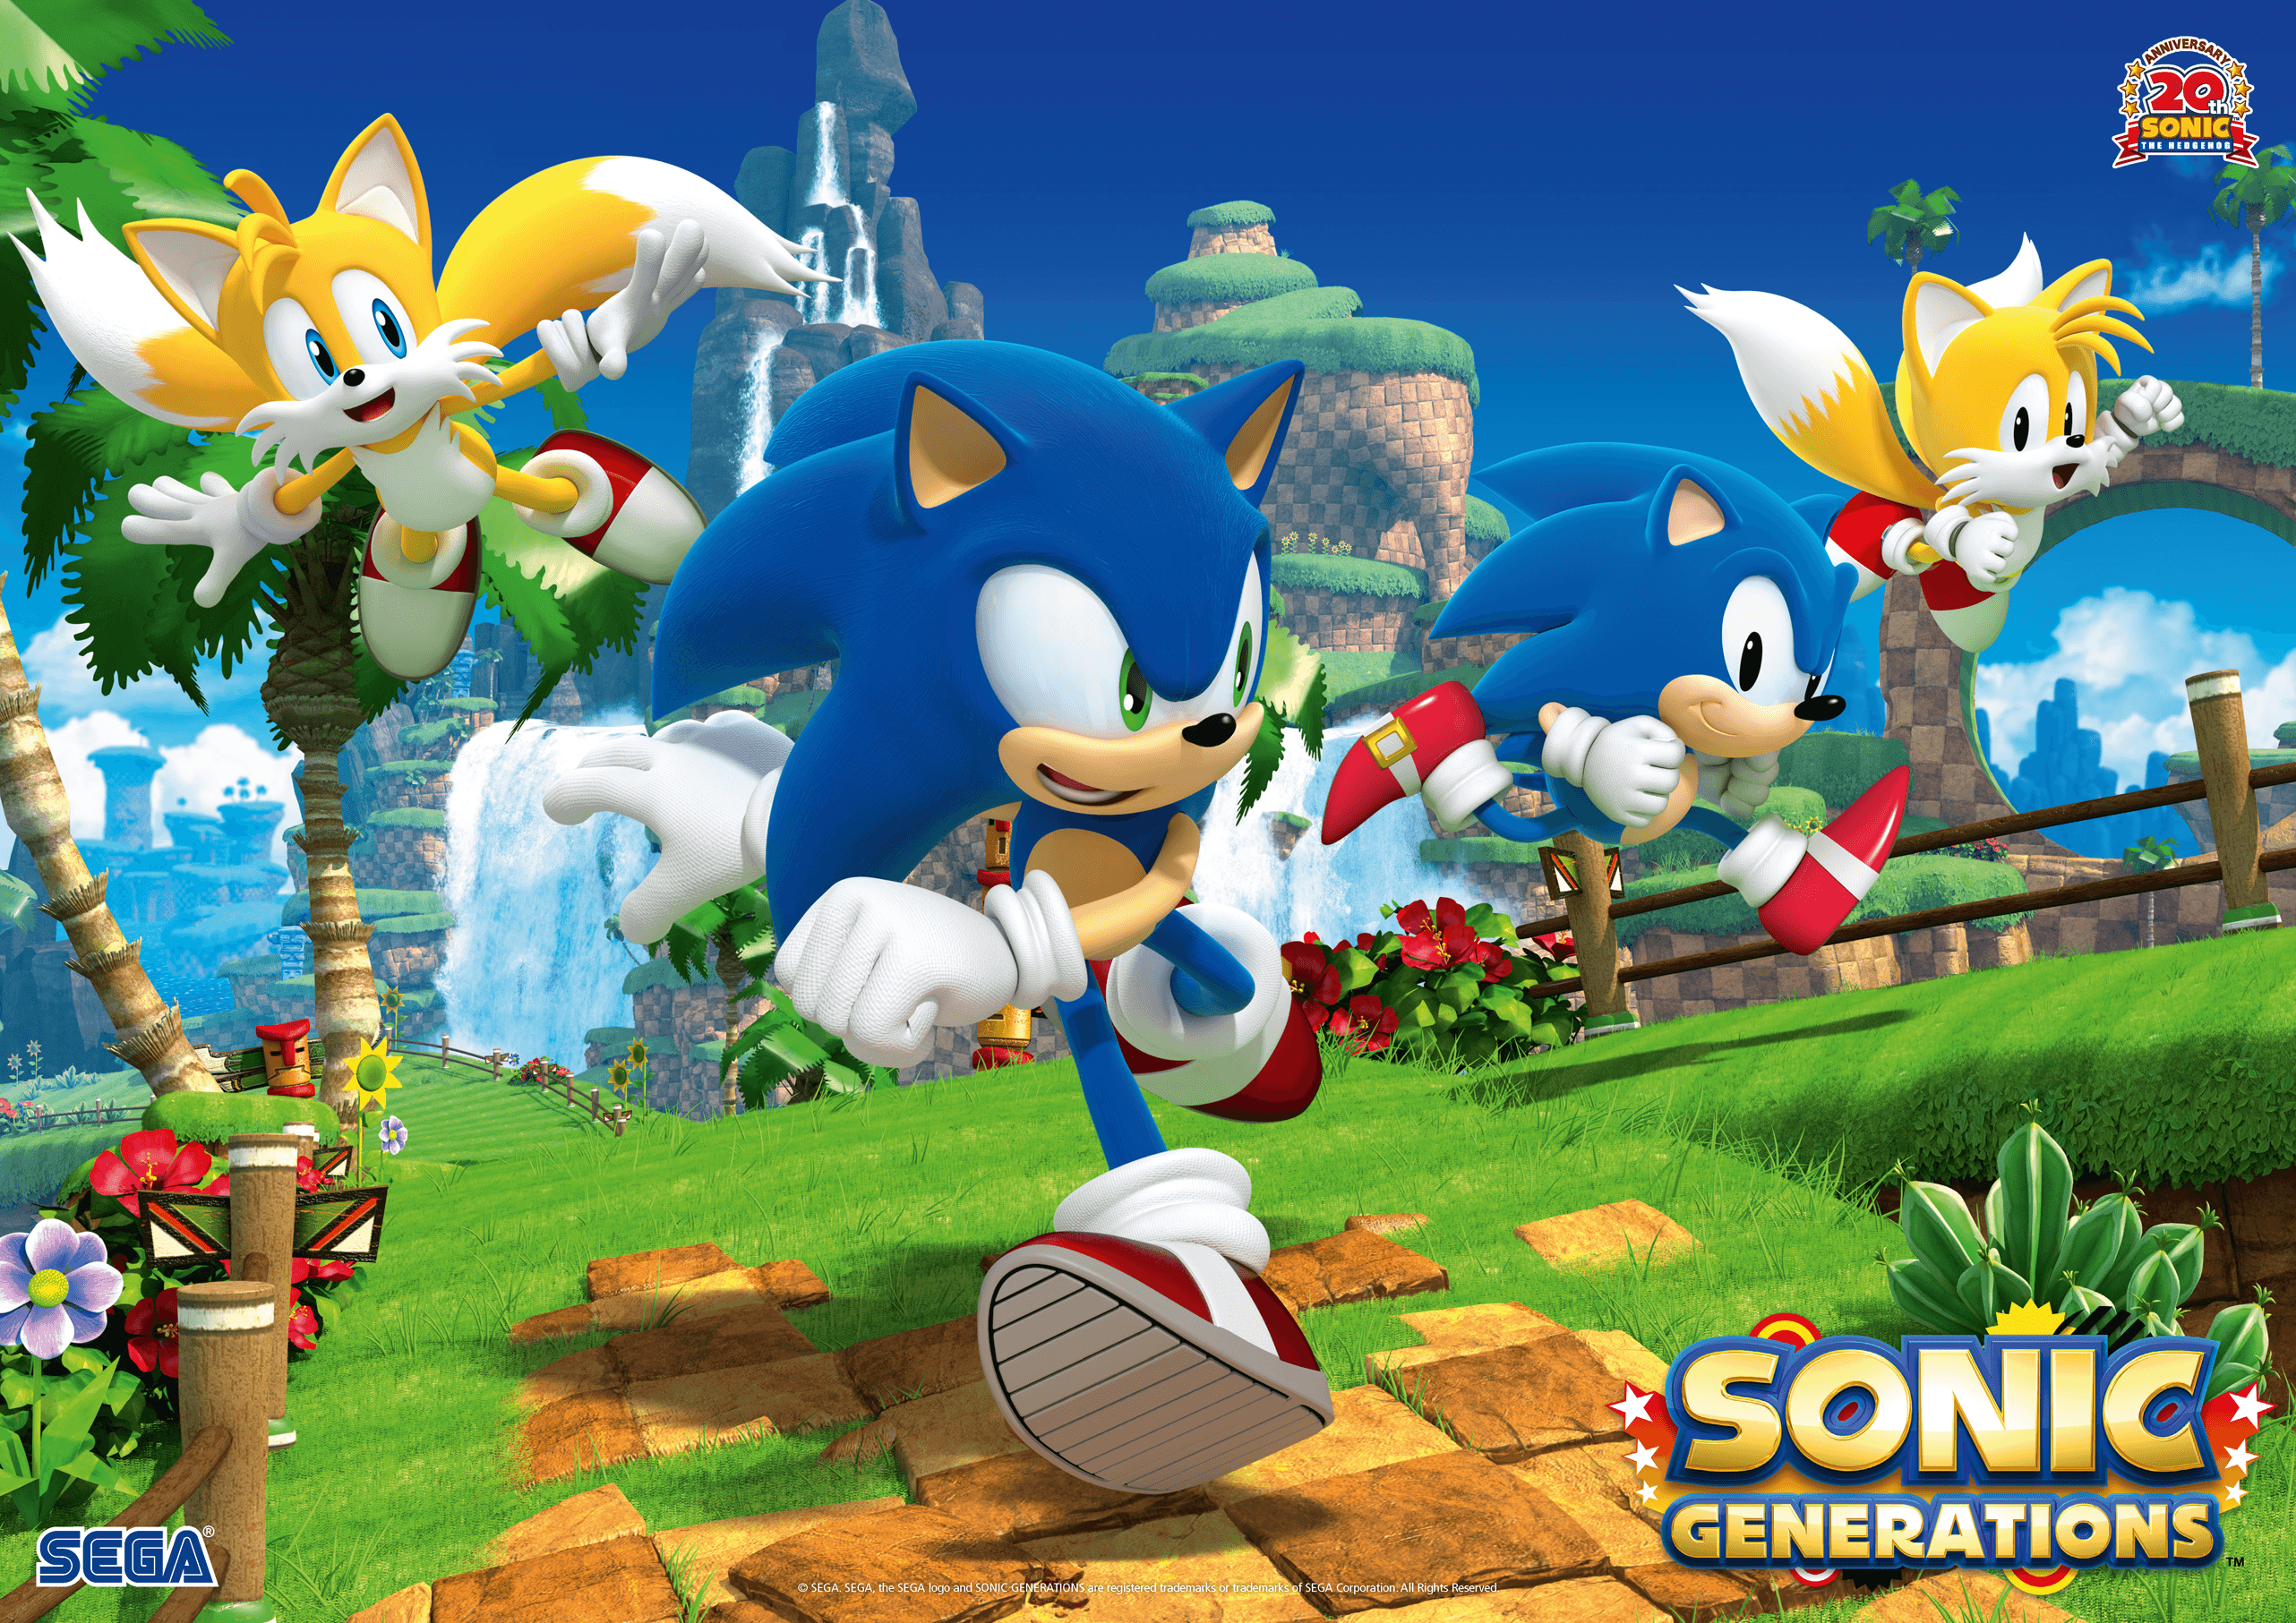 Sonic Wallpapers Top Free Sonic Backgrounds Wallpaperaccess